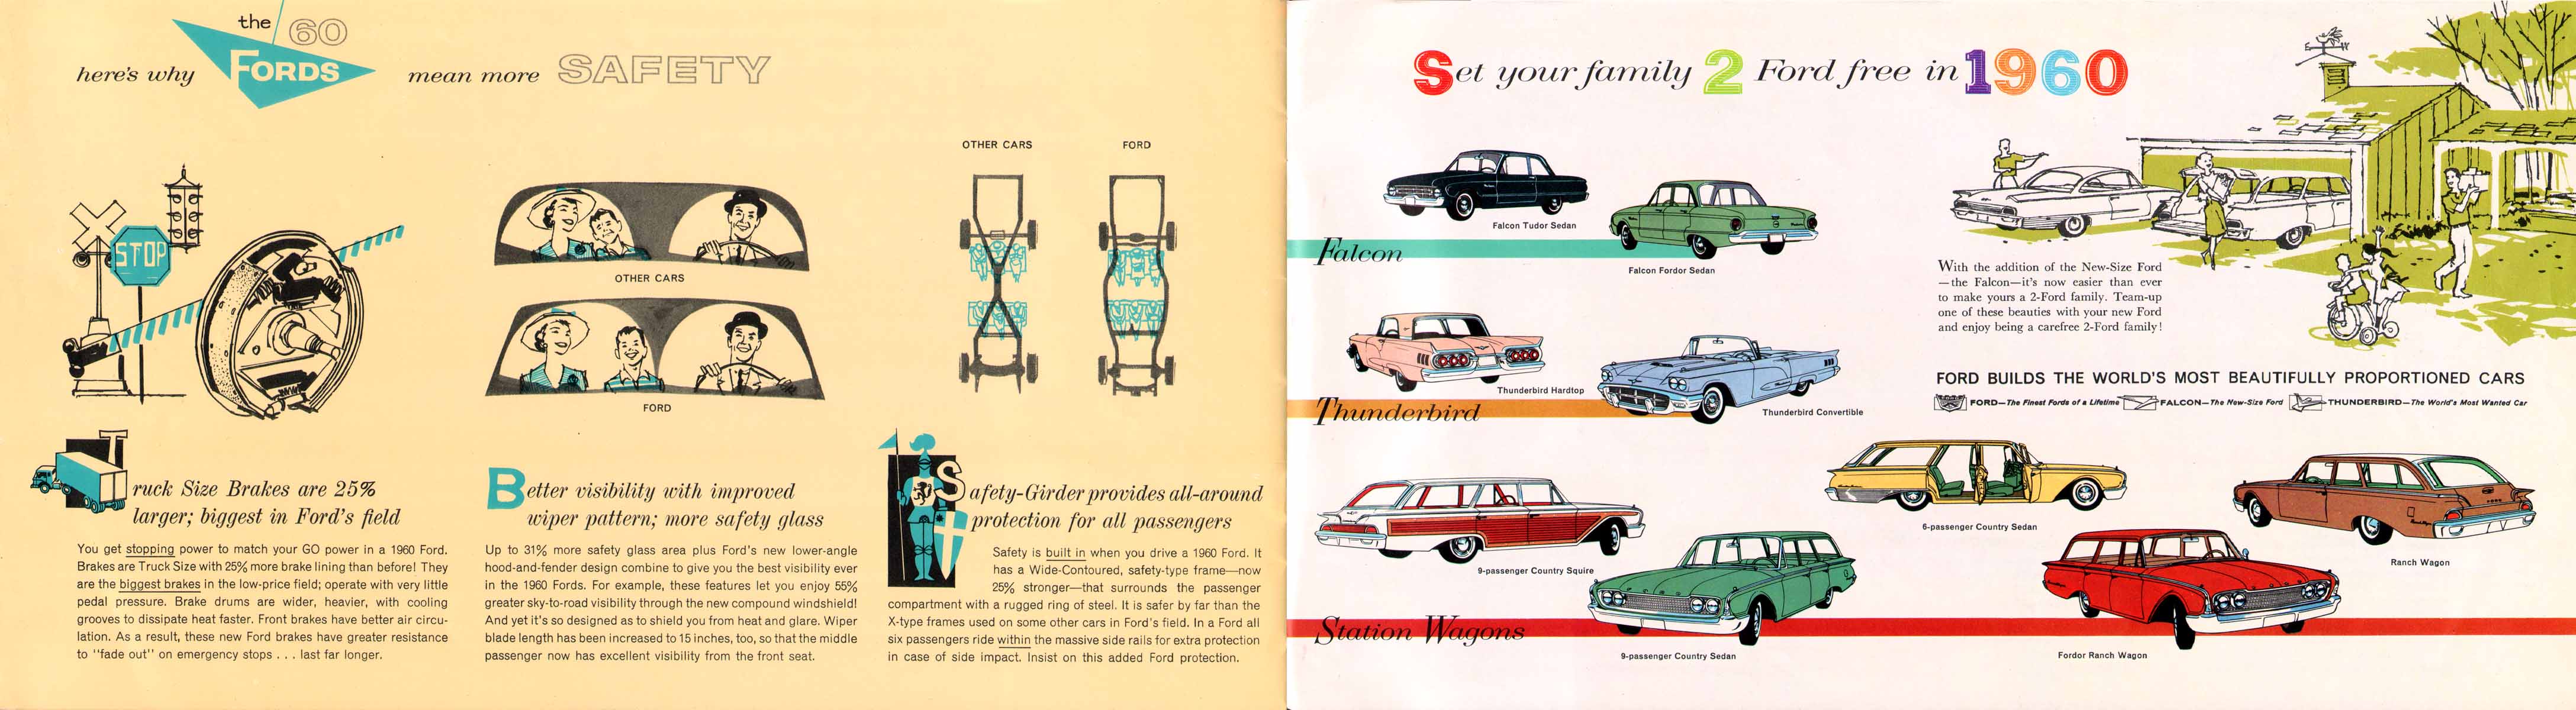 1960 Ford Brochure Page 5